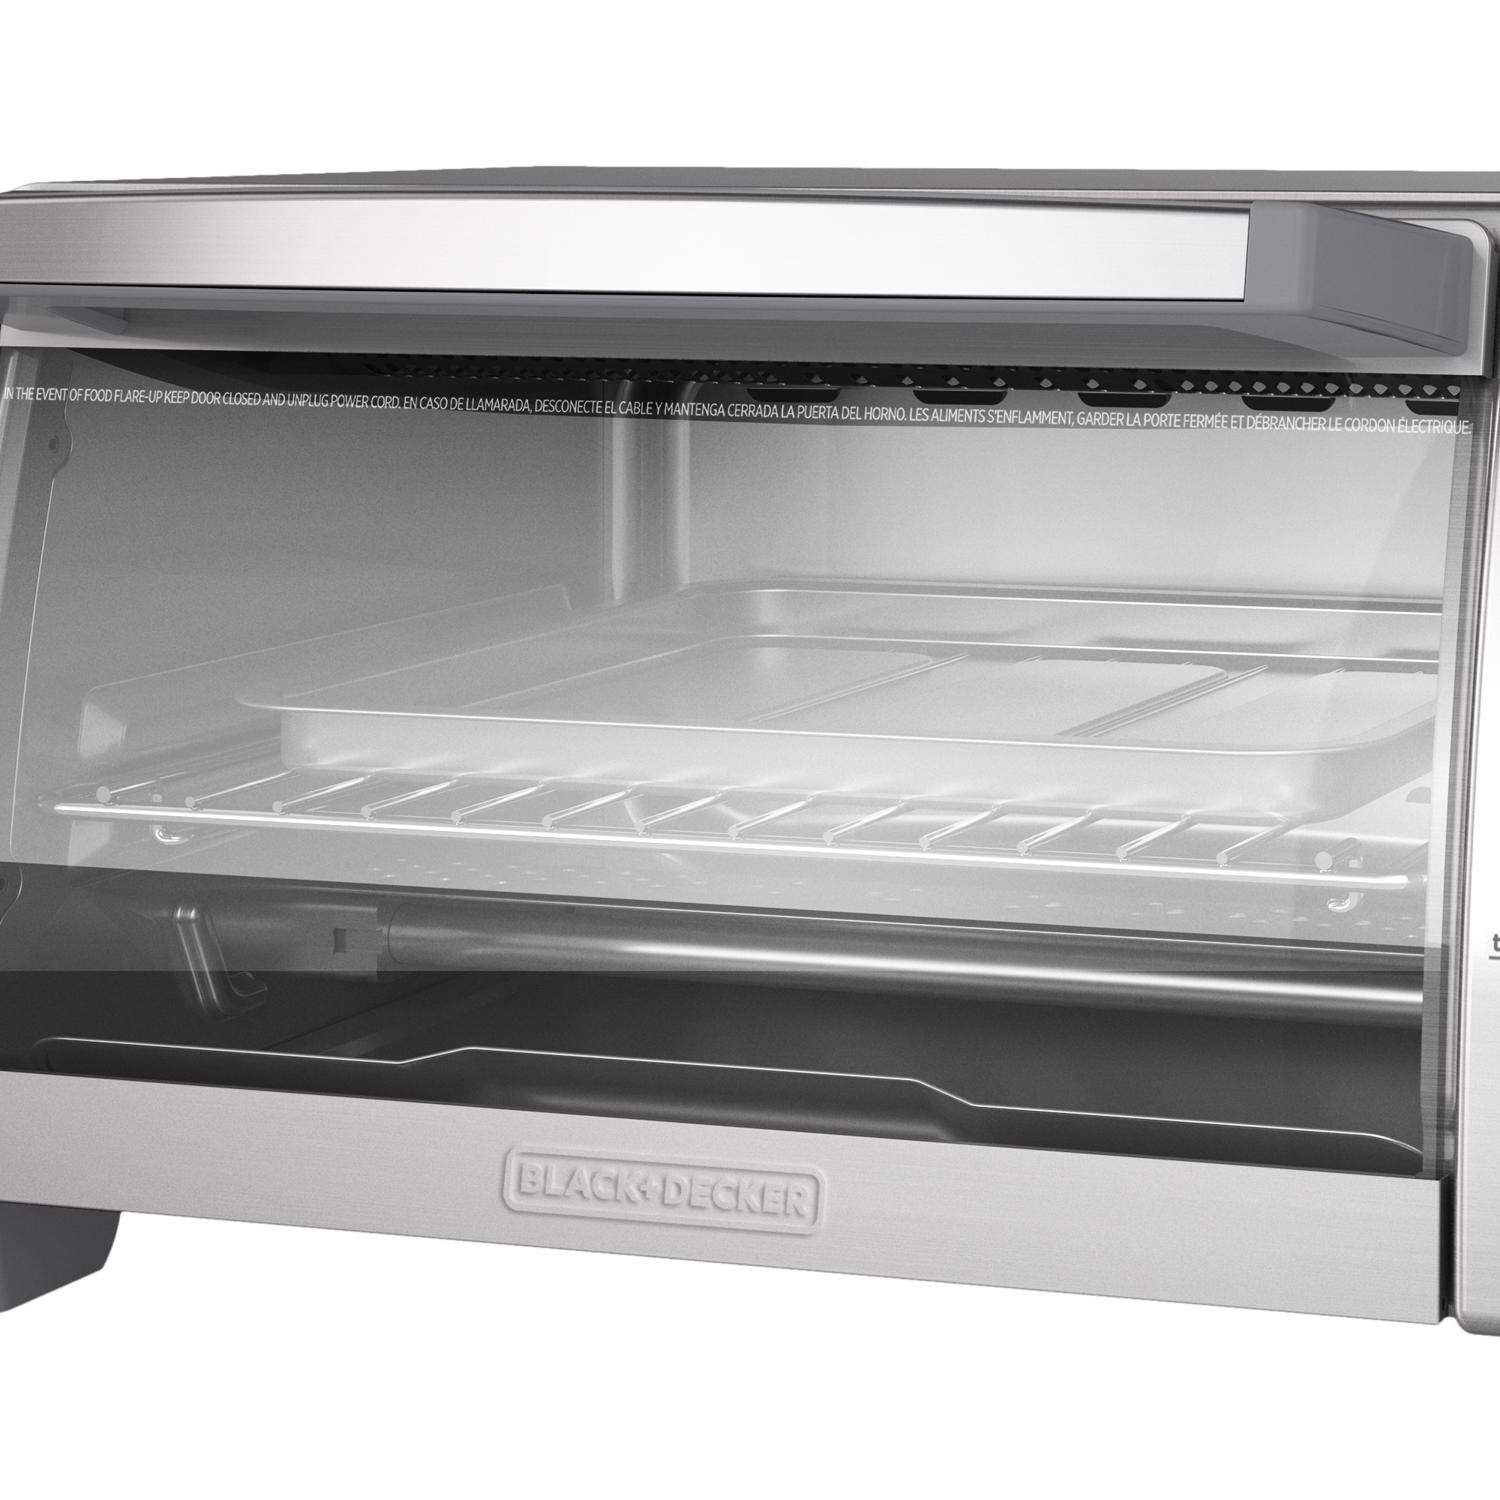 This BLACK+DECKER Stainless Steel Pizza/Toaster Oven is now $50